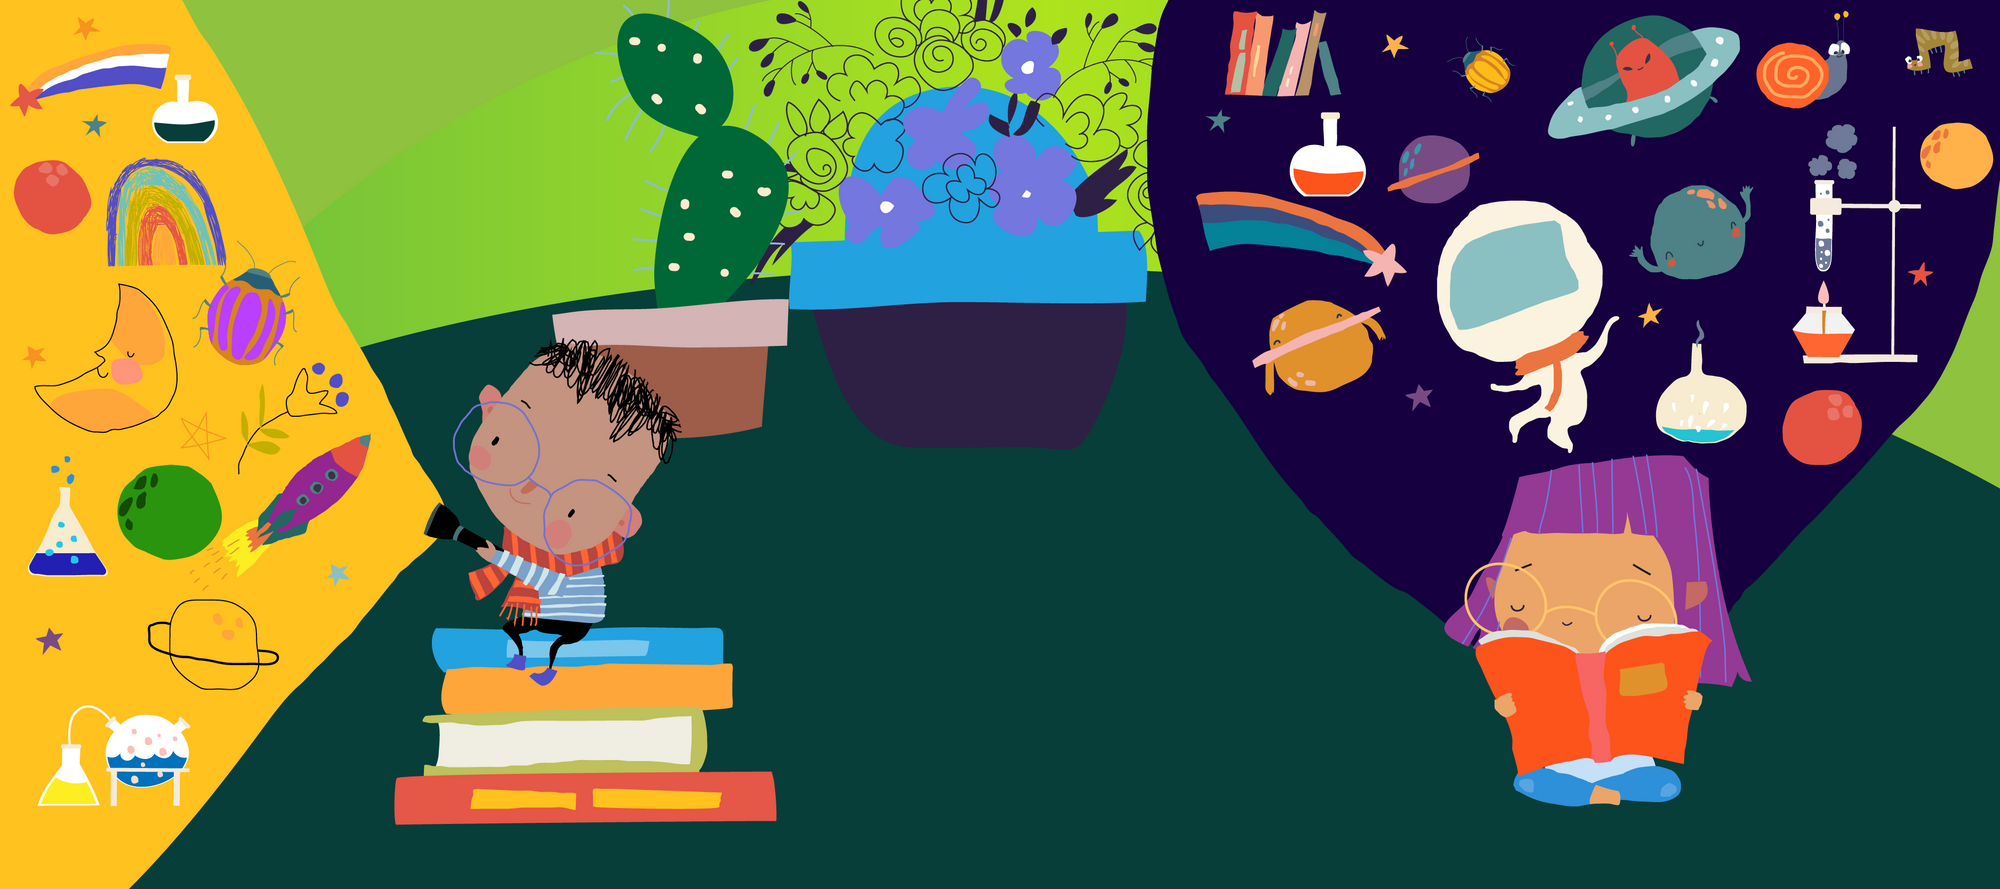 On the left, a child sits on a stack of books and shines a light that illuminates STEAM subjects, on the right a child reads a book and behind her a thought blurb shows science-ie things